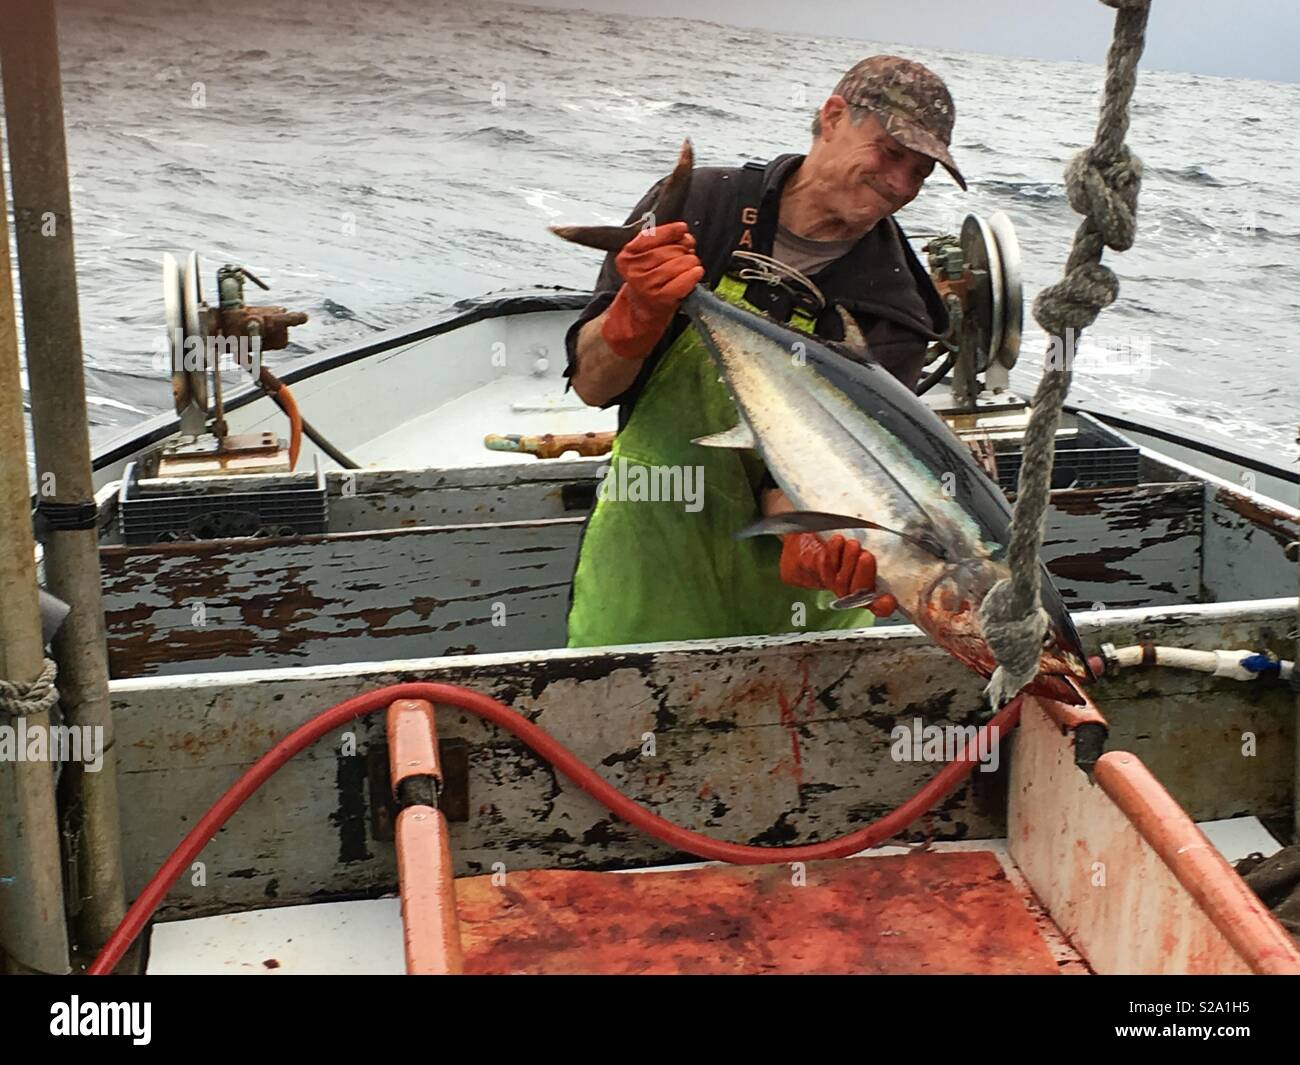 Handsome senior male commercial fisherman lands albacore tuna in the North Pacific Ocean 100 miles off the Oregon Coast. Stock Photo